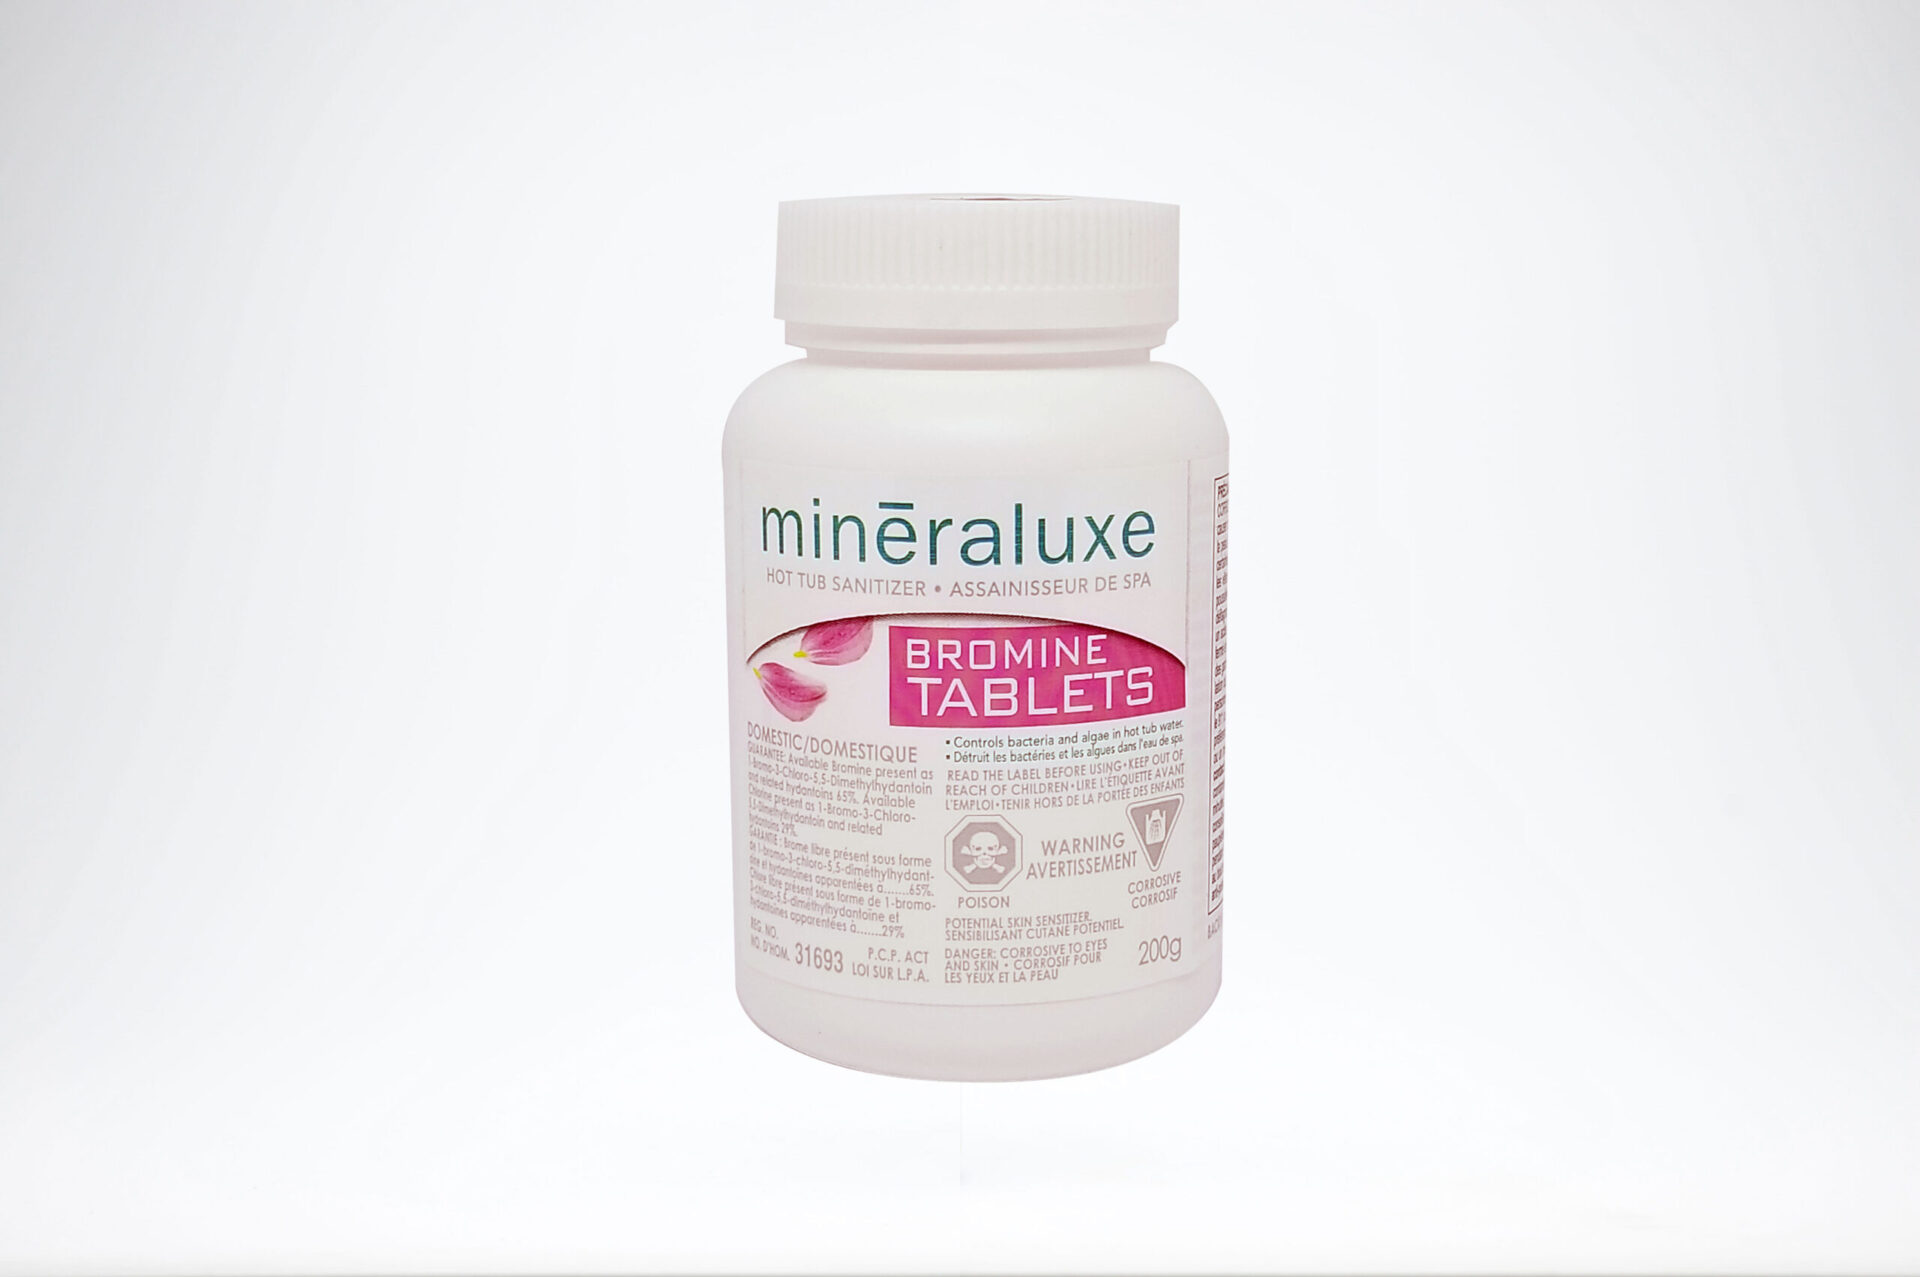 Mineraluxe Bromine Tabs 200g 1 scaled - Mineraluxe Bromine Tabs 200g